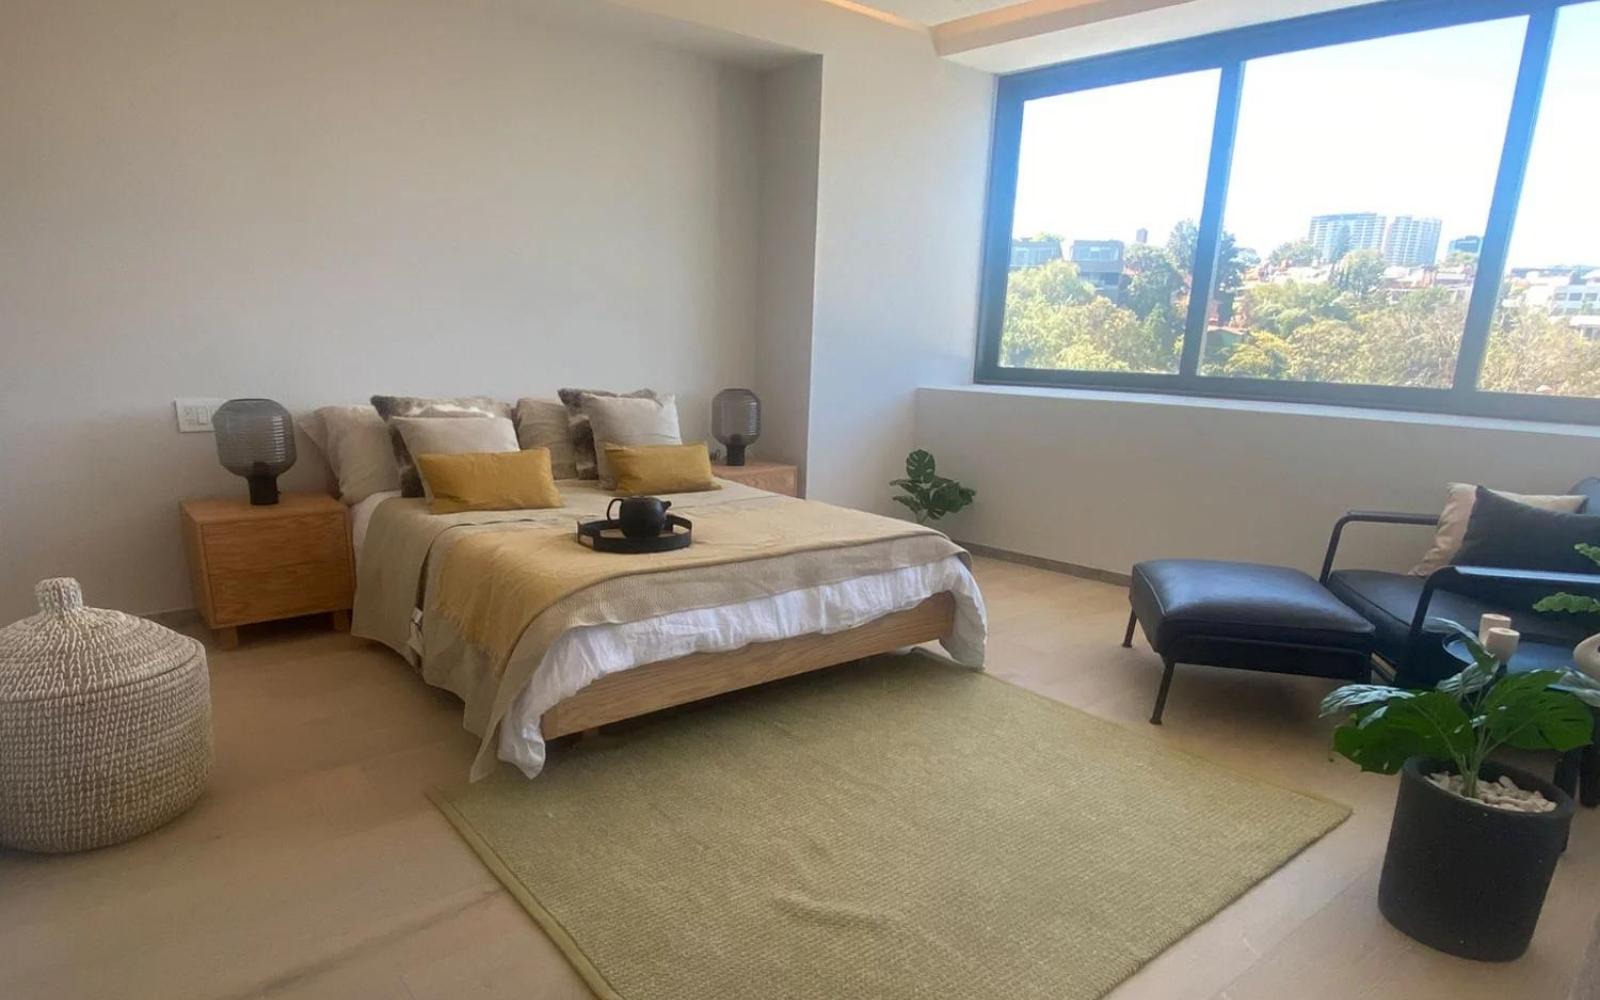 Apartment with pool, social event room, terrace on the top floor, Santa Fe, for sale, CDMX.